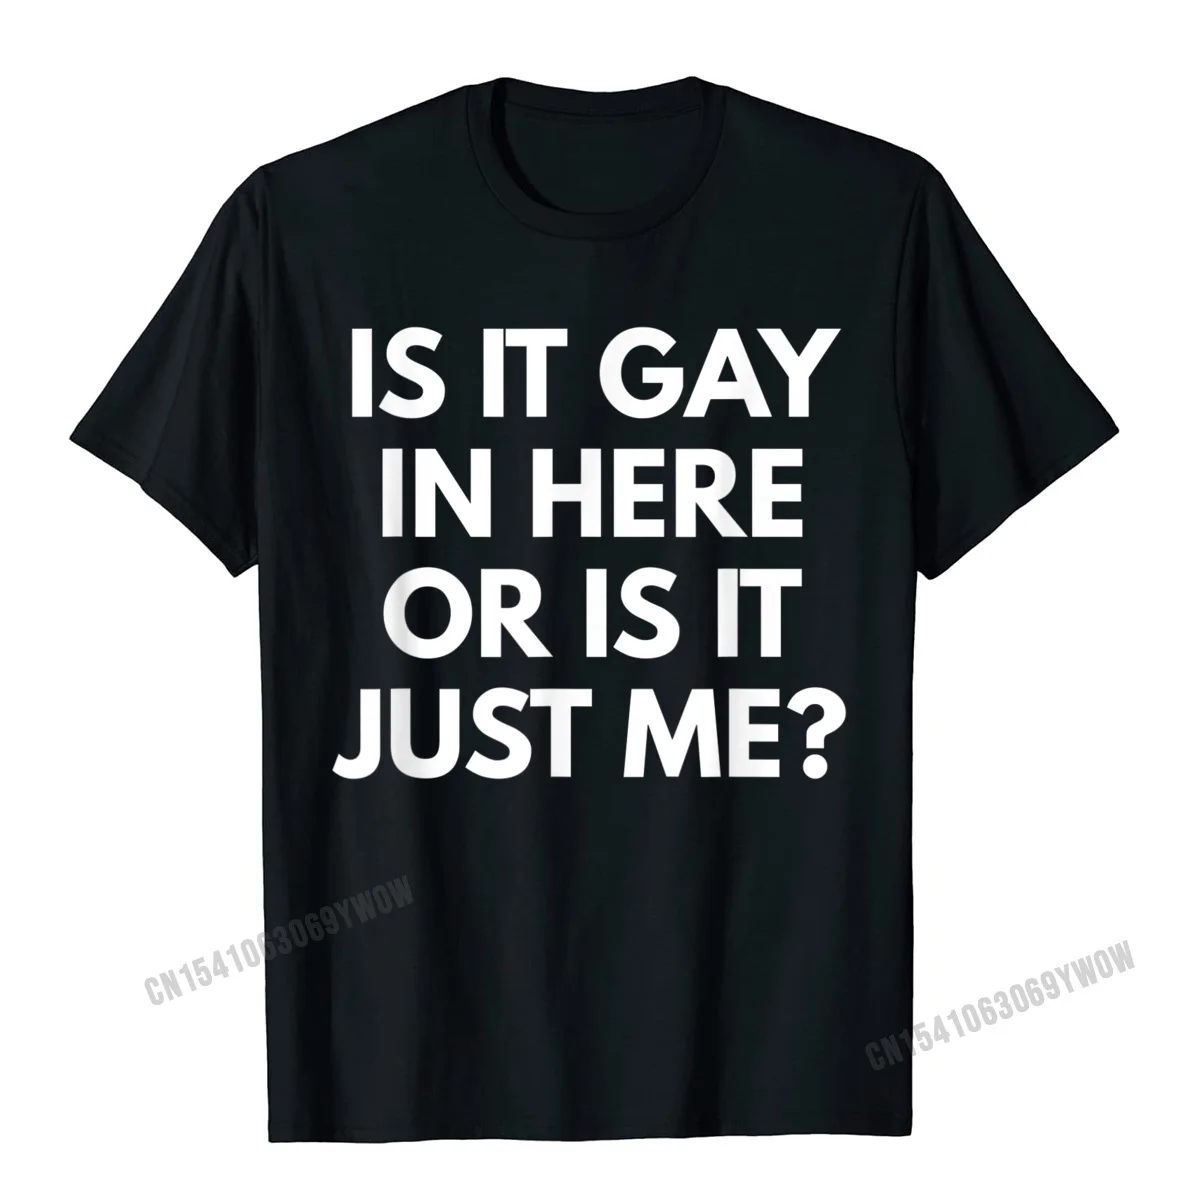 

Is It Gay In Here Or Is It Just Me T-Shirt - Funny LGBT Camisas Men Classic Tshirts New Coming Tees Cotton Men Party